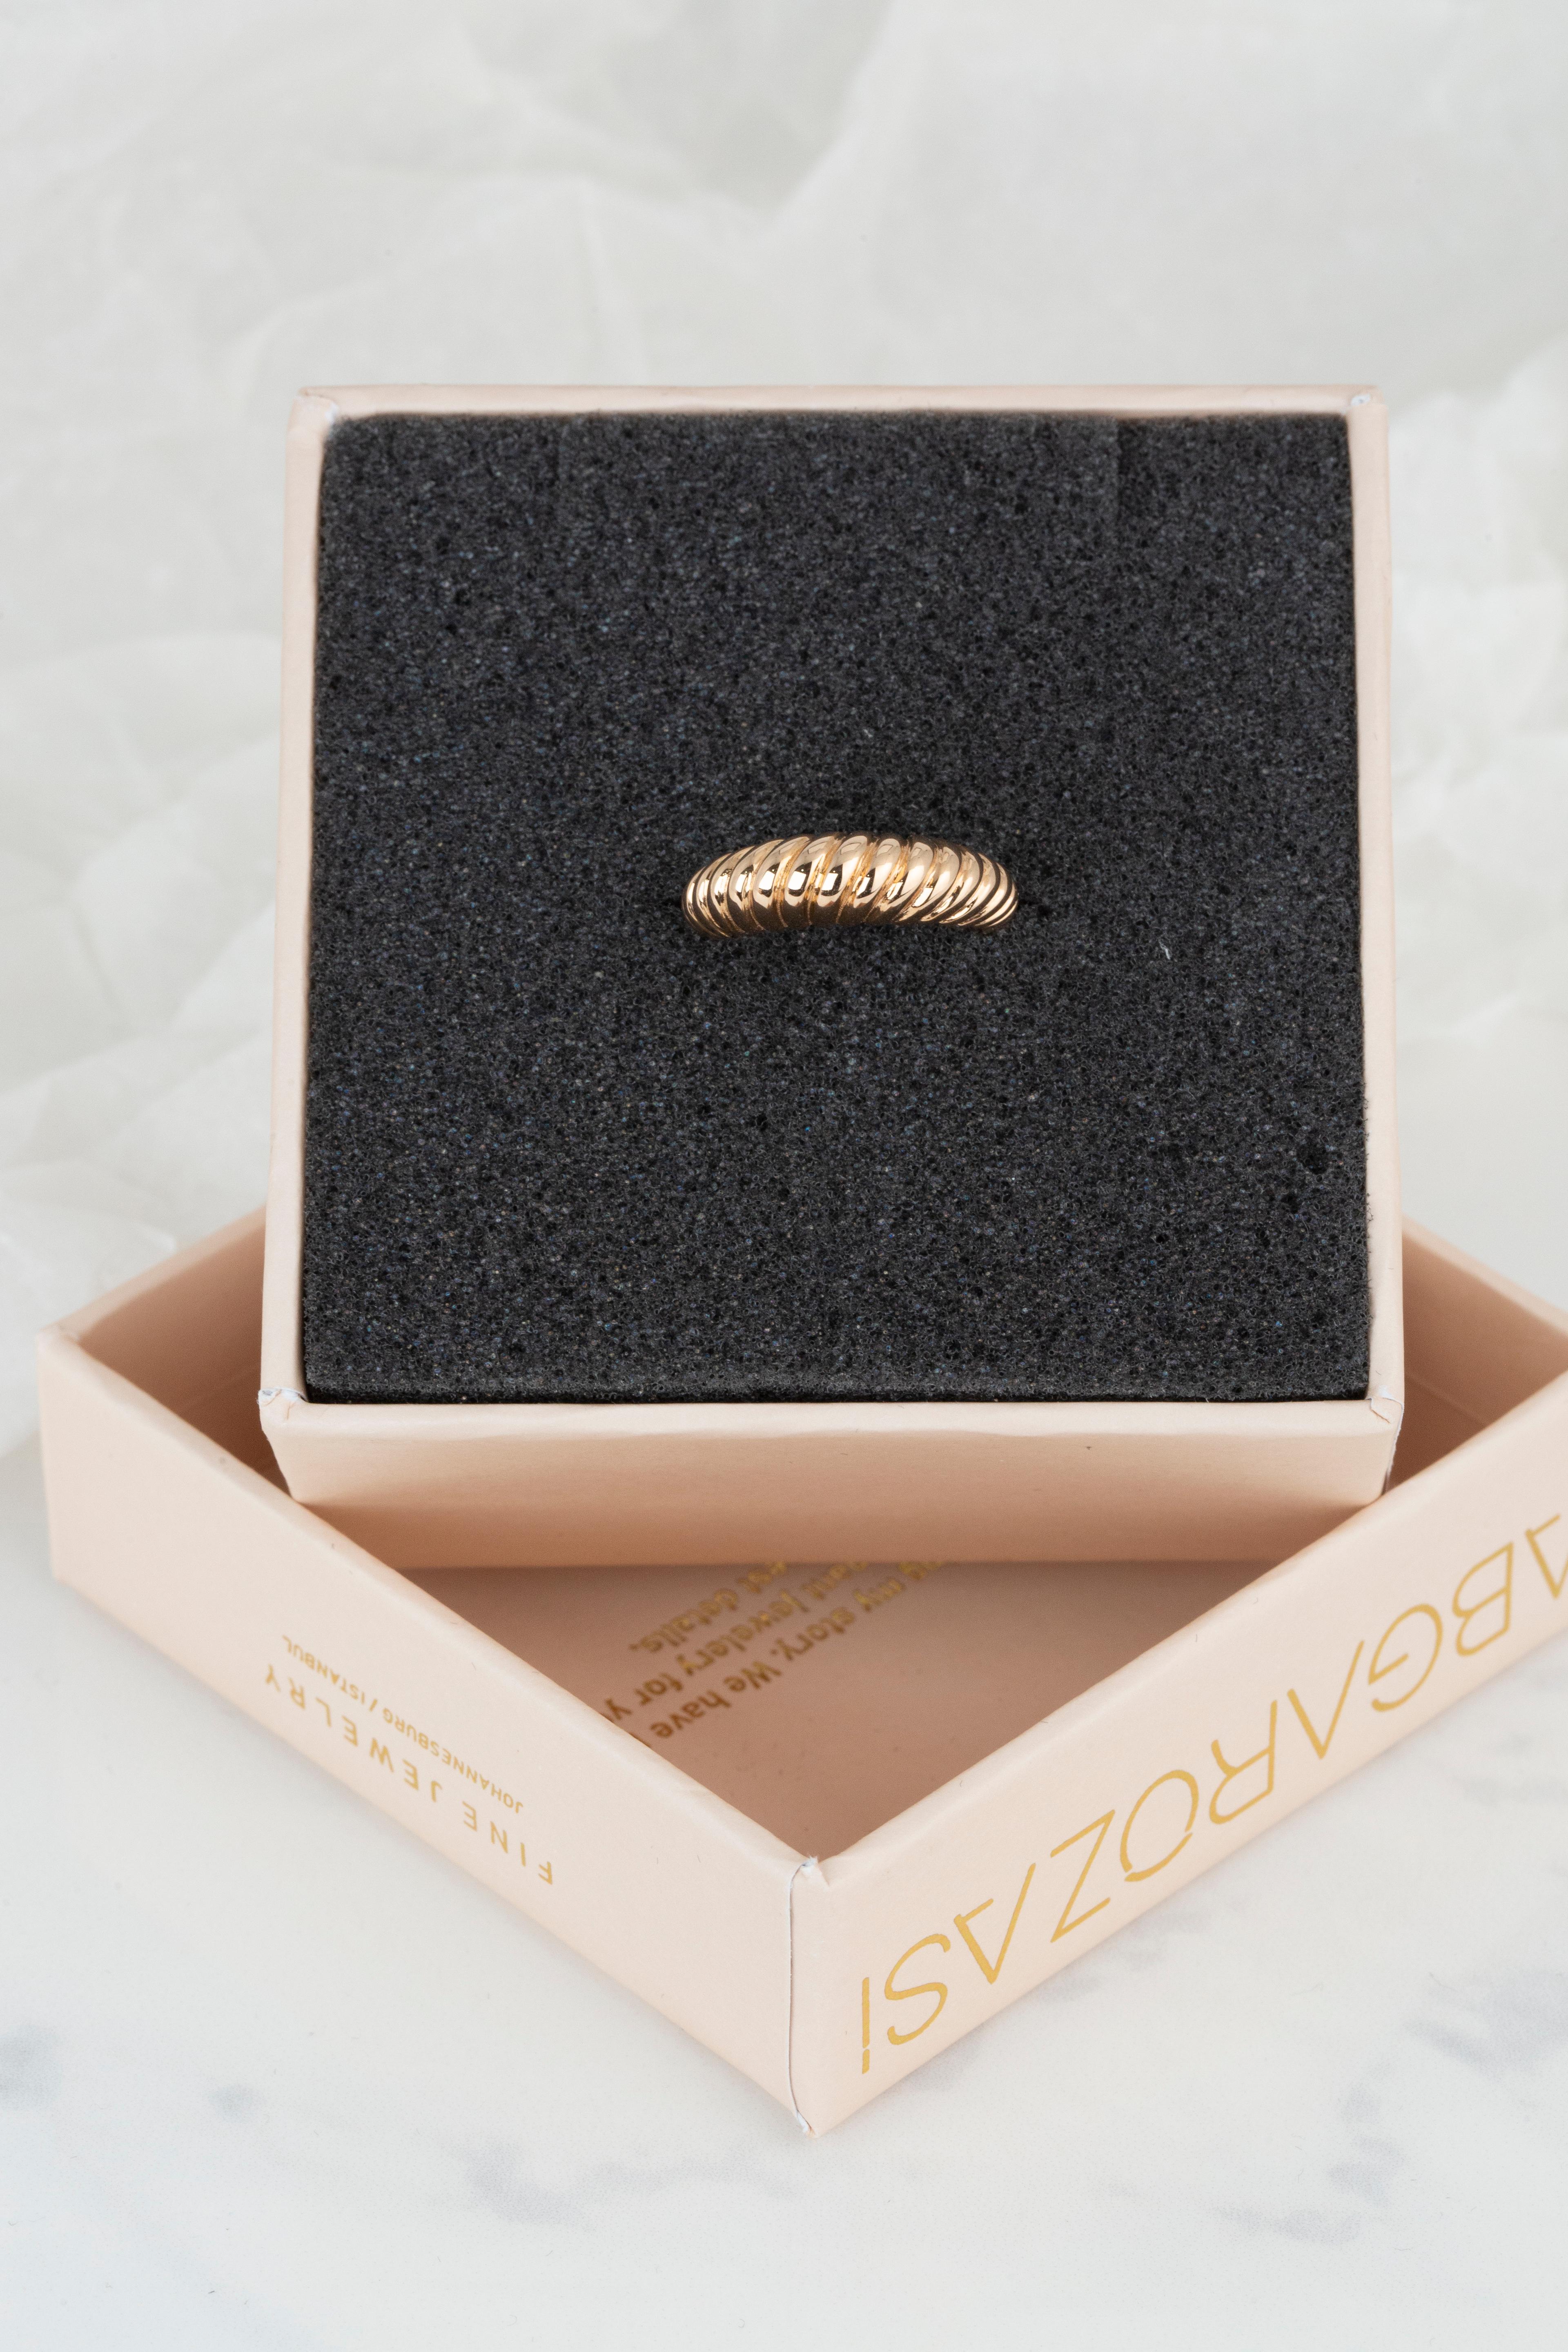 For Sale:  Croissant Ring, Dome Croissant Ring, 14K Gold Croissant Ring 5